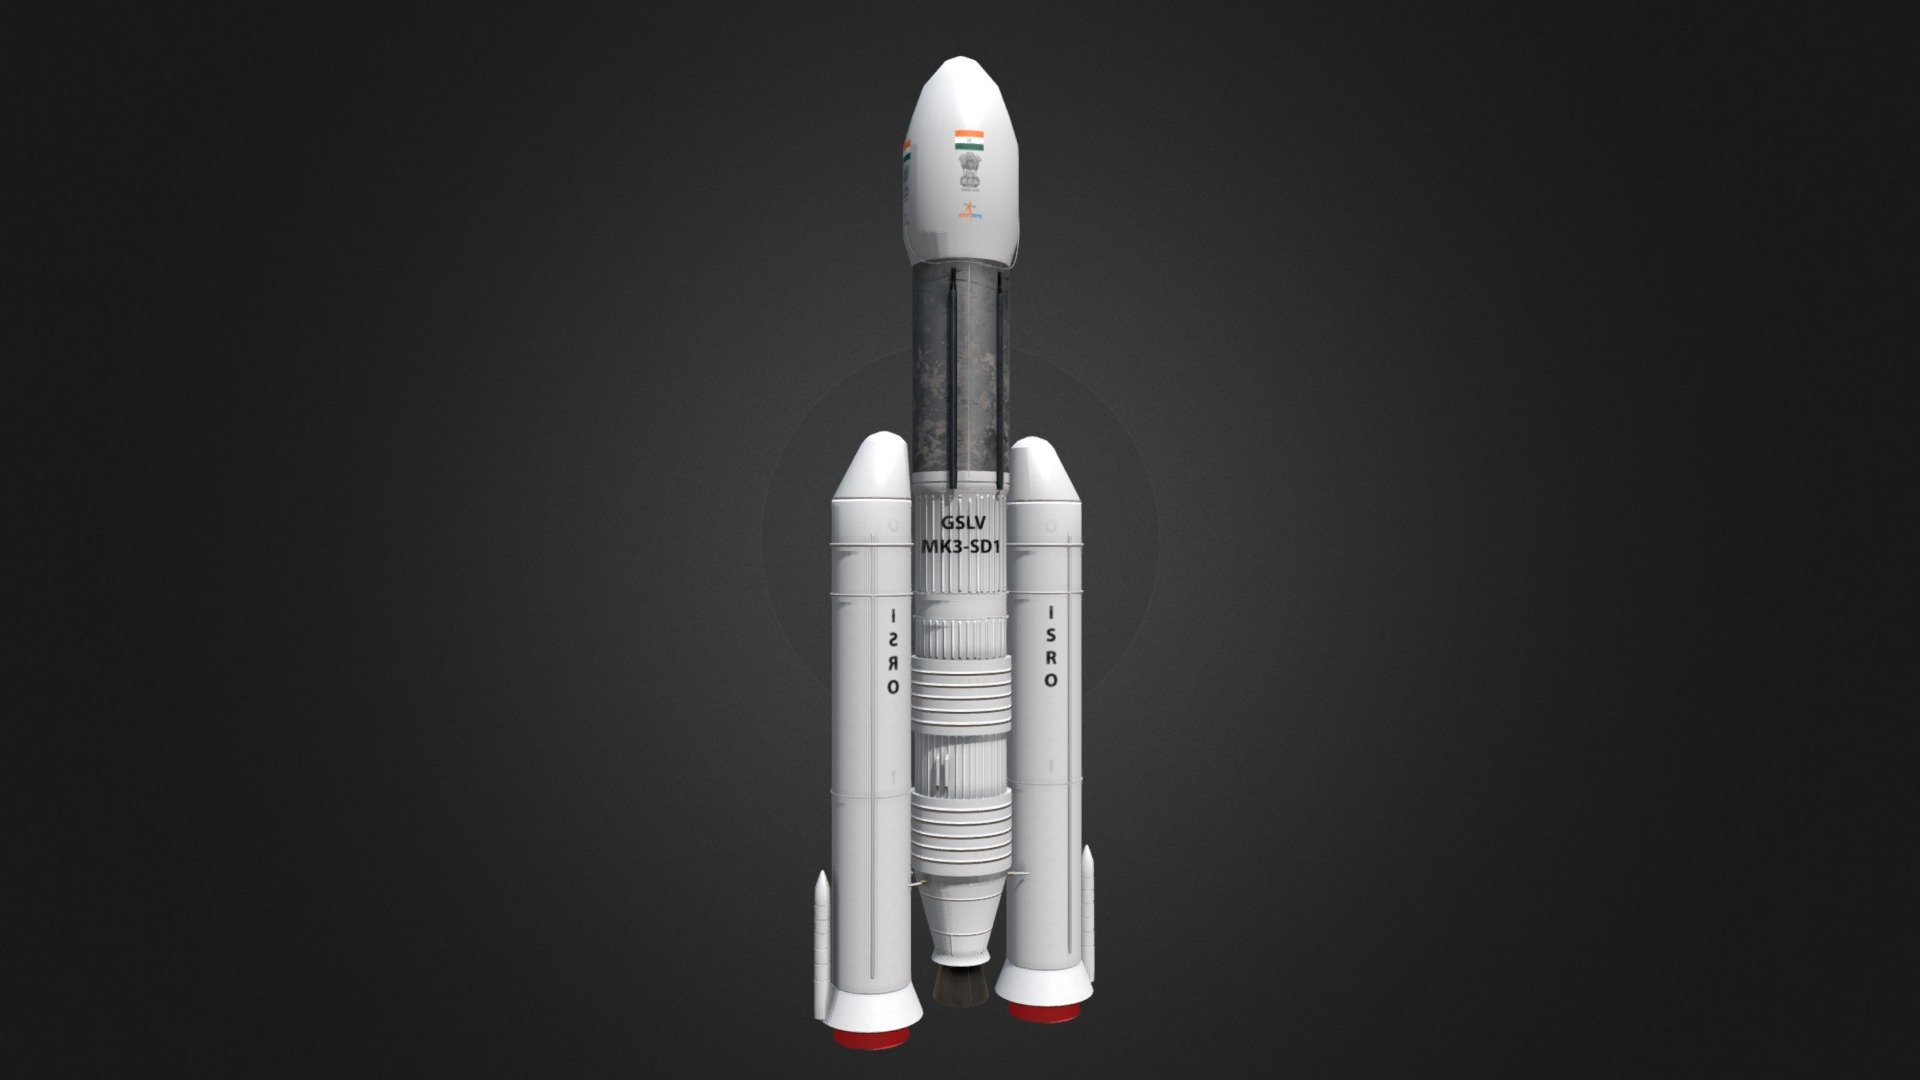 Indian Geosynchronous Satelite Launch Vehicle (GSLV) Mk3 made in Blender  v2.79 with UV unwrapped and painted in Substance Painter 2.

Texture resolutions are 1024x1024 including metal, roughness, heights, normals 3d model